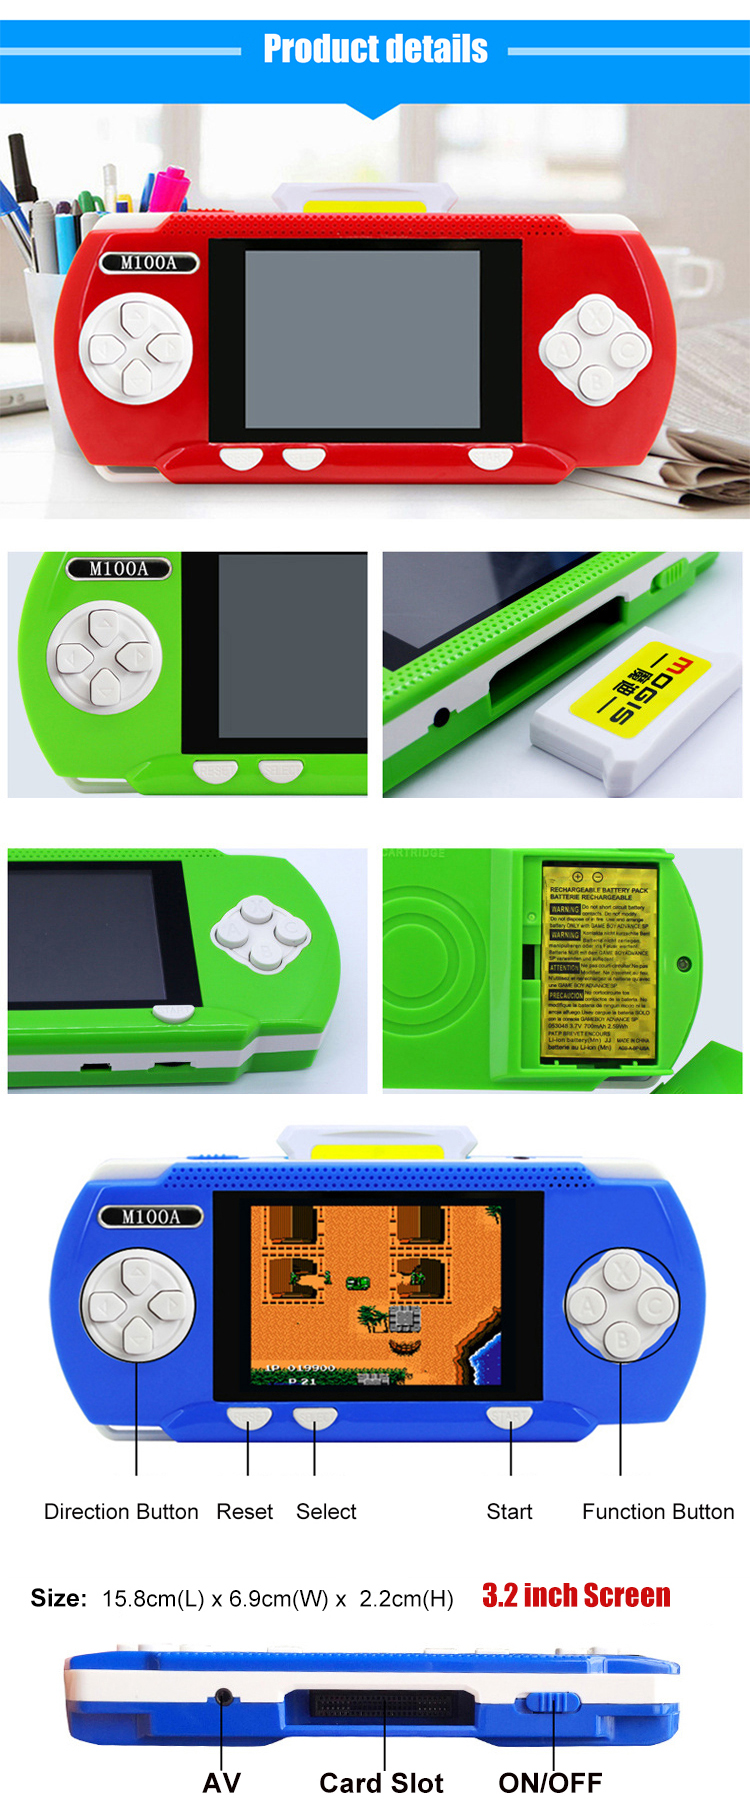 Retro Gaming Consoles Graphic by mdlne · Creative Fabrica